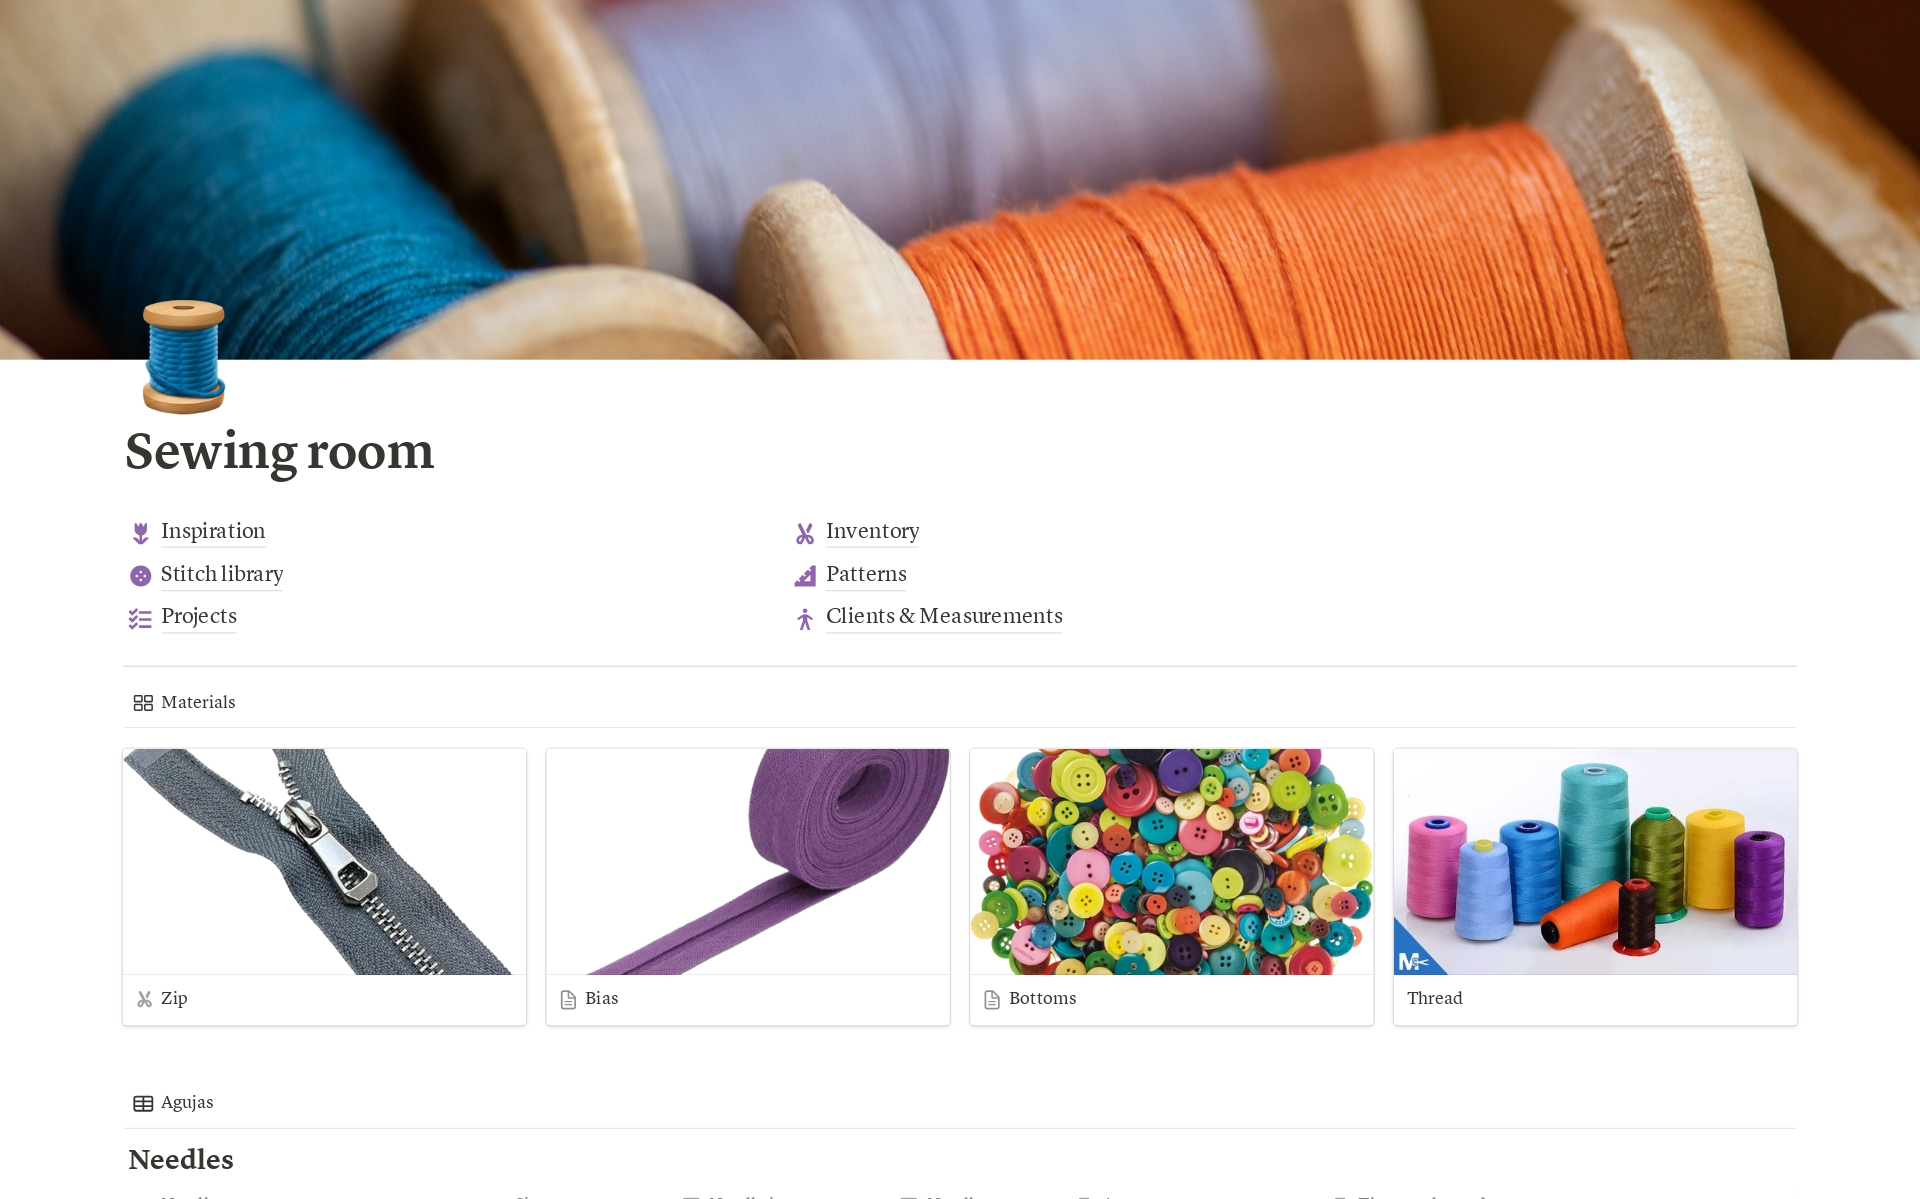 🧵 Are you a passionate sewer or a professional tailor looking to organize your projects, materials, patterns, and client information all in one place? Look no further! Our Sewing Room Template is here to streamline your creative process and boost your productivity! 🧵